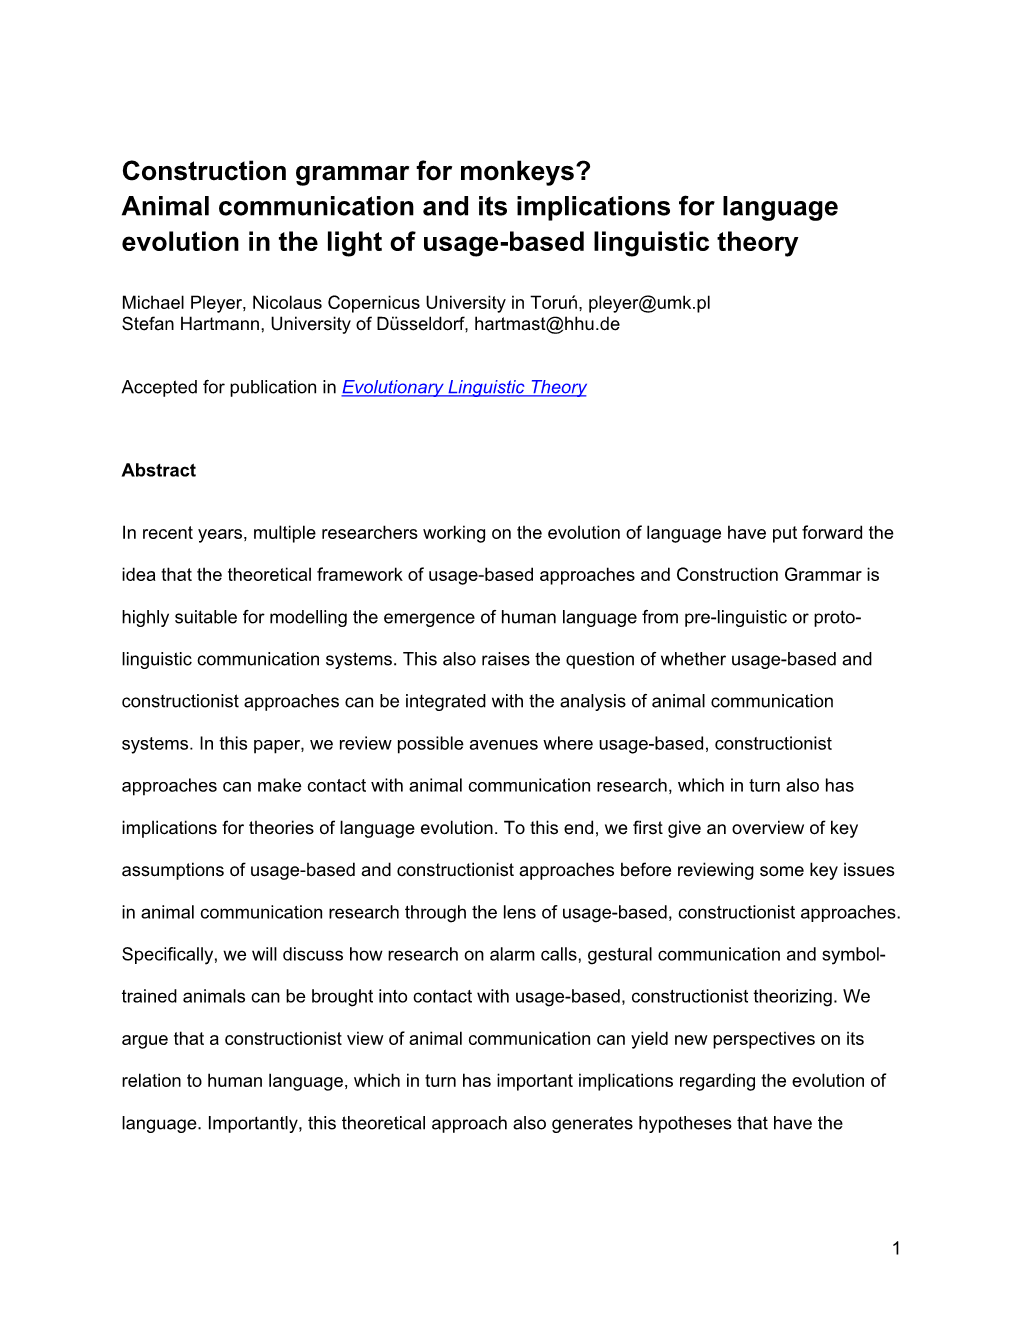 Construction Grammar for Monkeys? Animal Communication and Its Implications for Language Evolution in the Light of Usage-Based Linguistic Theory